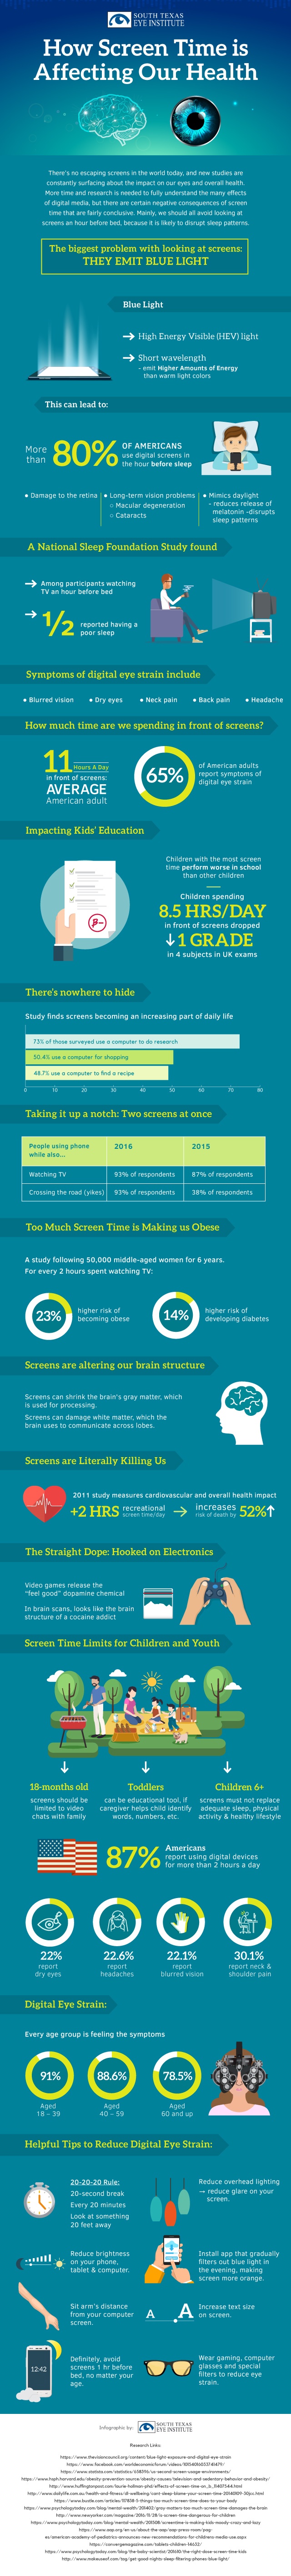 Effects of Screen Time on Health Infographic